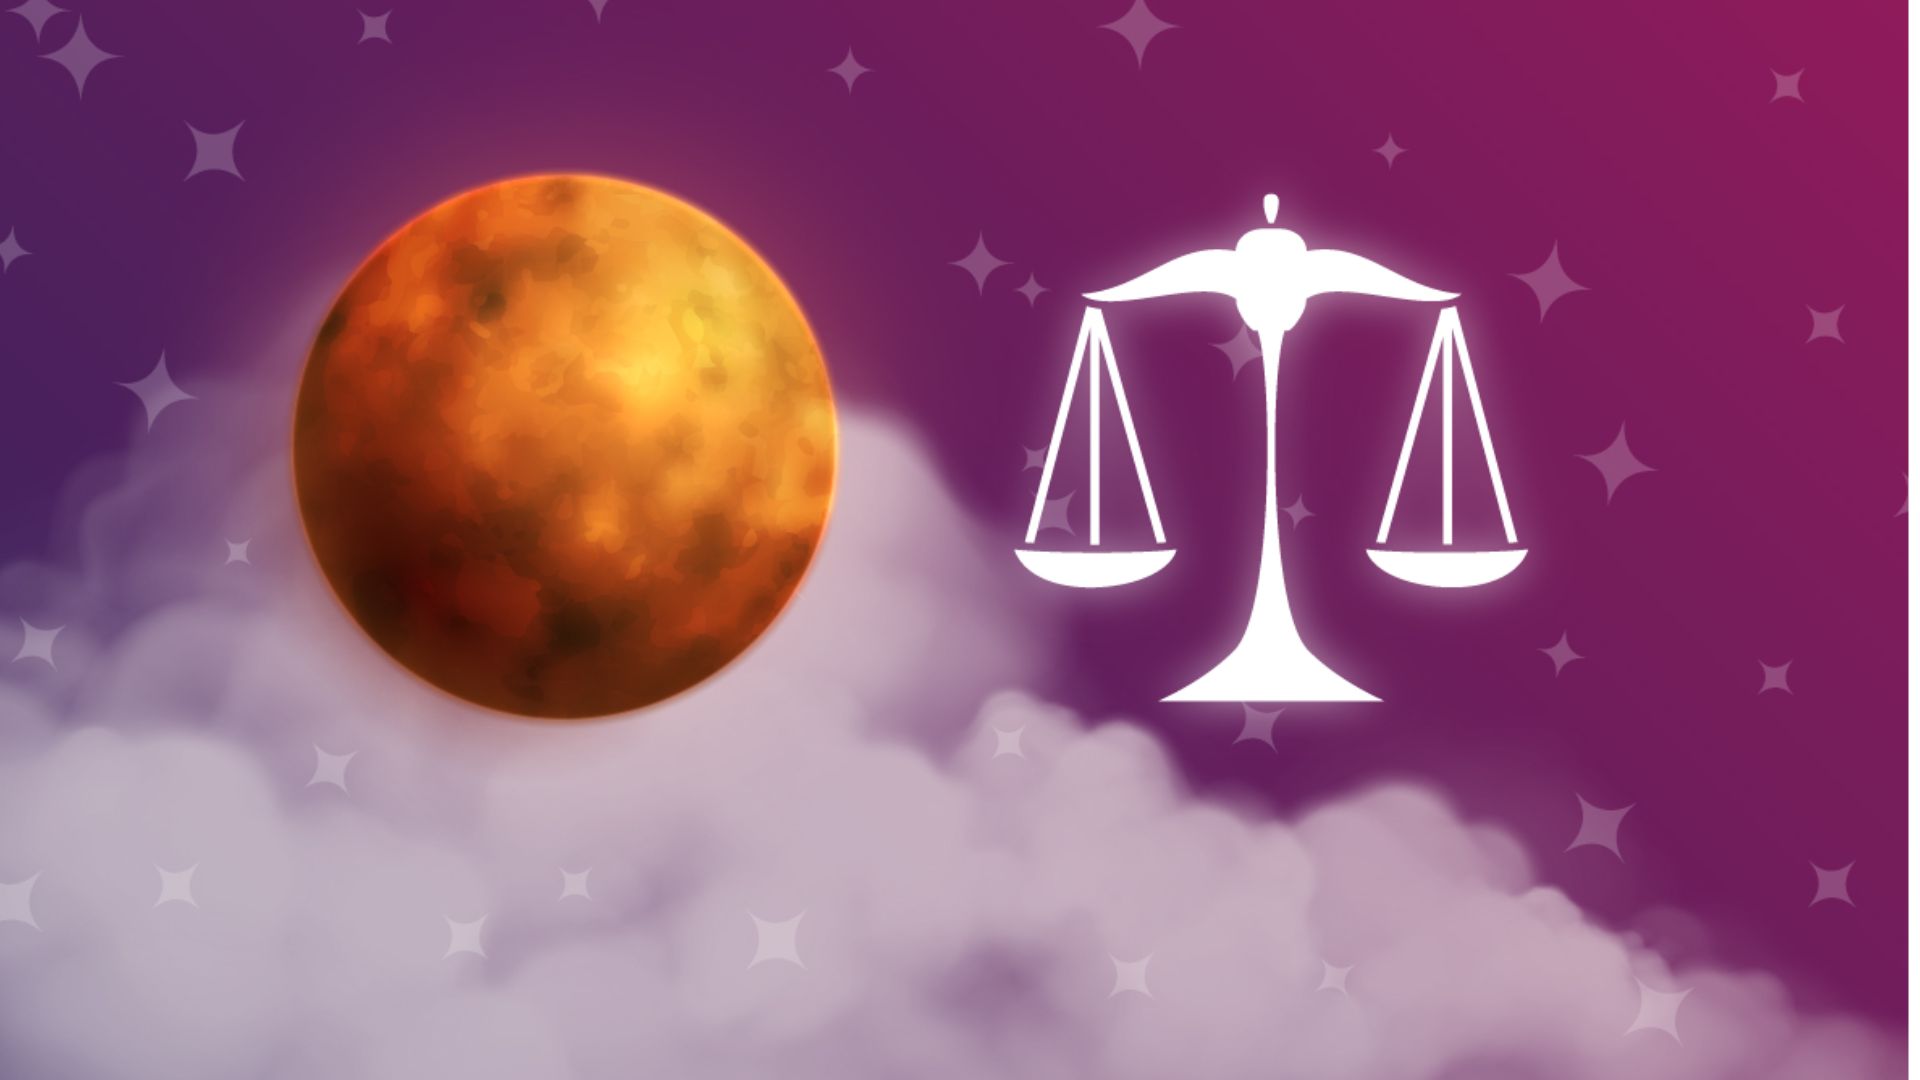 Mars In Libra - Sign Of Balance And Harmony